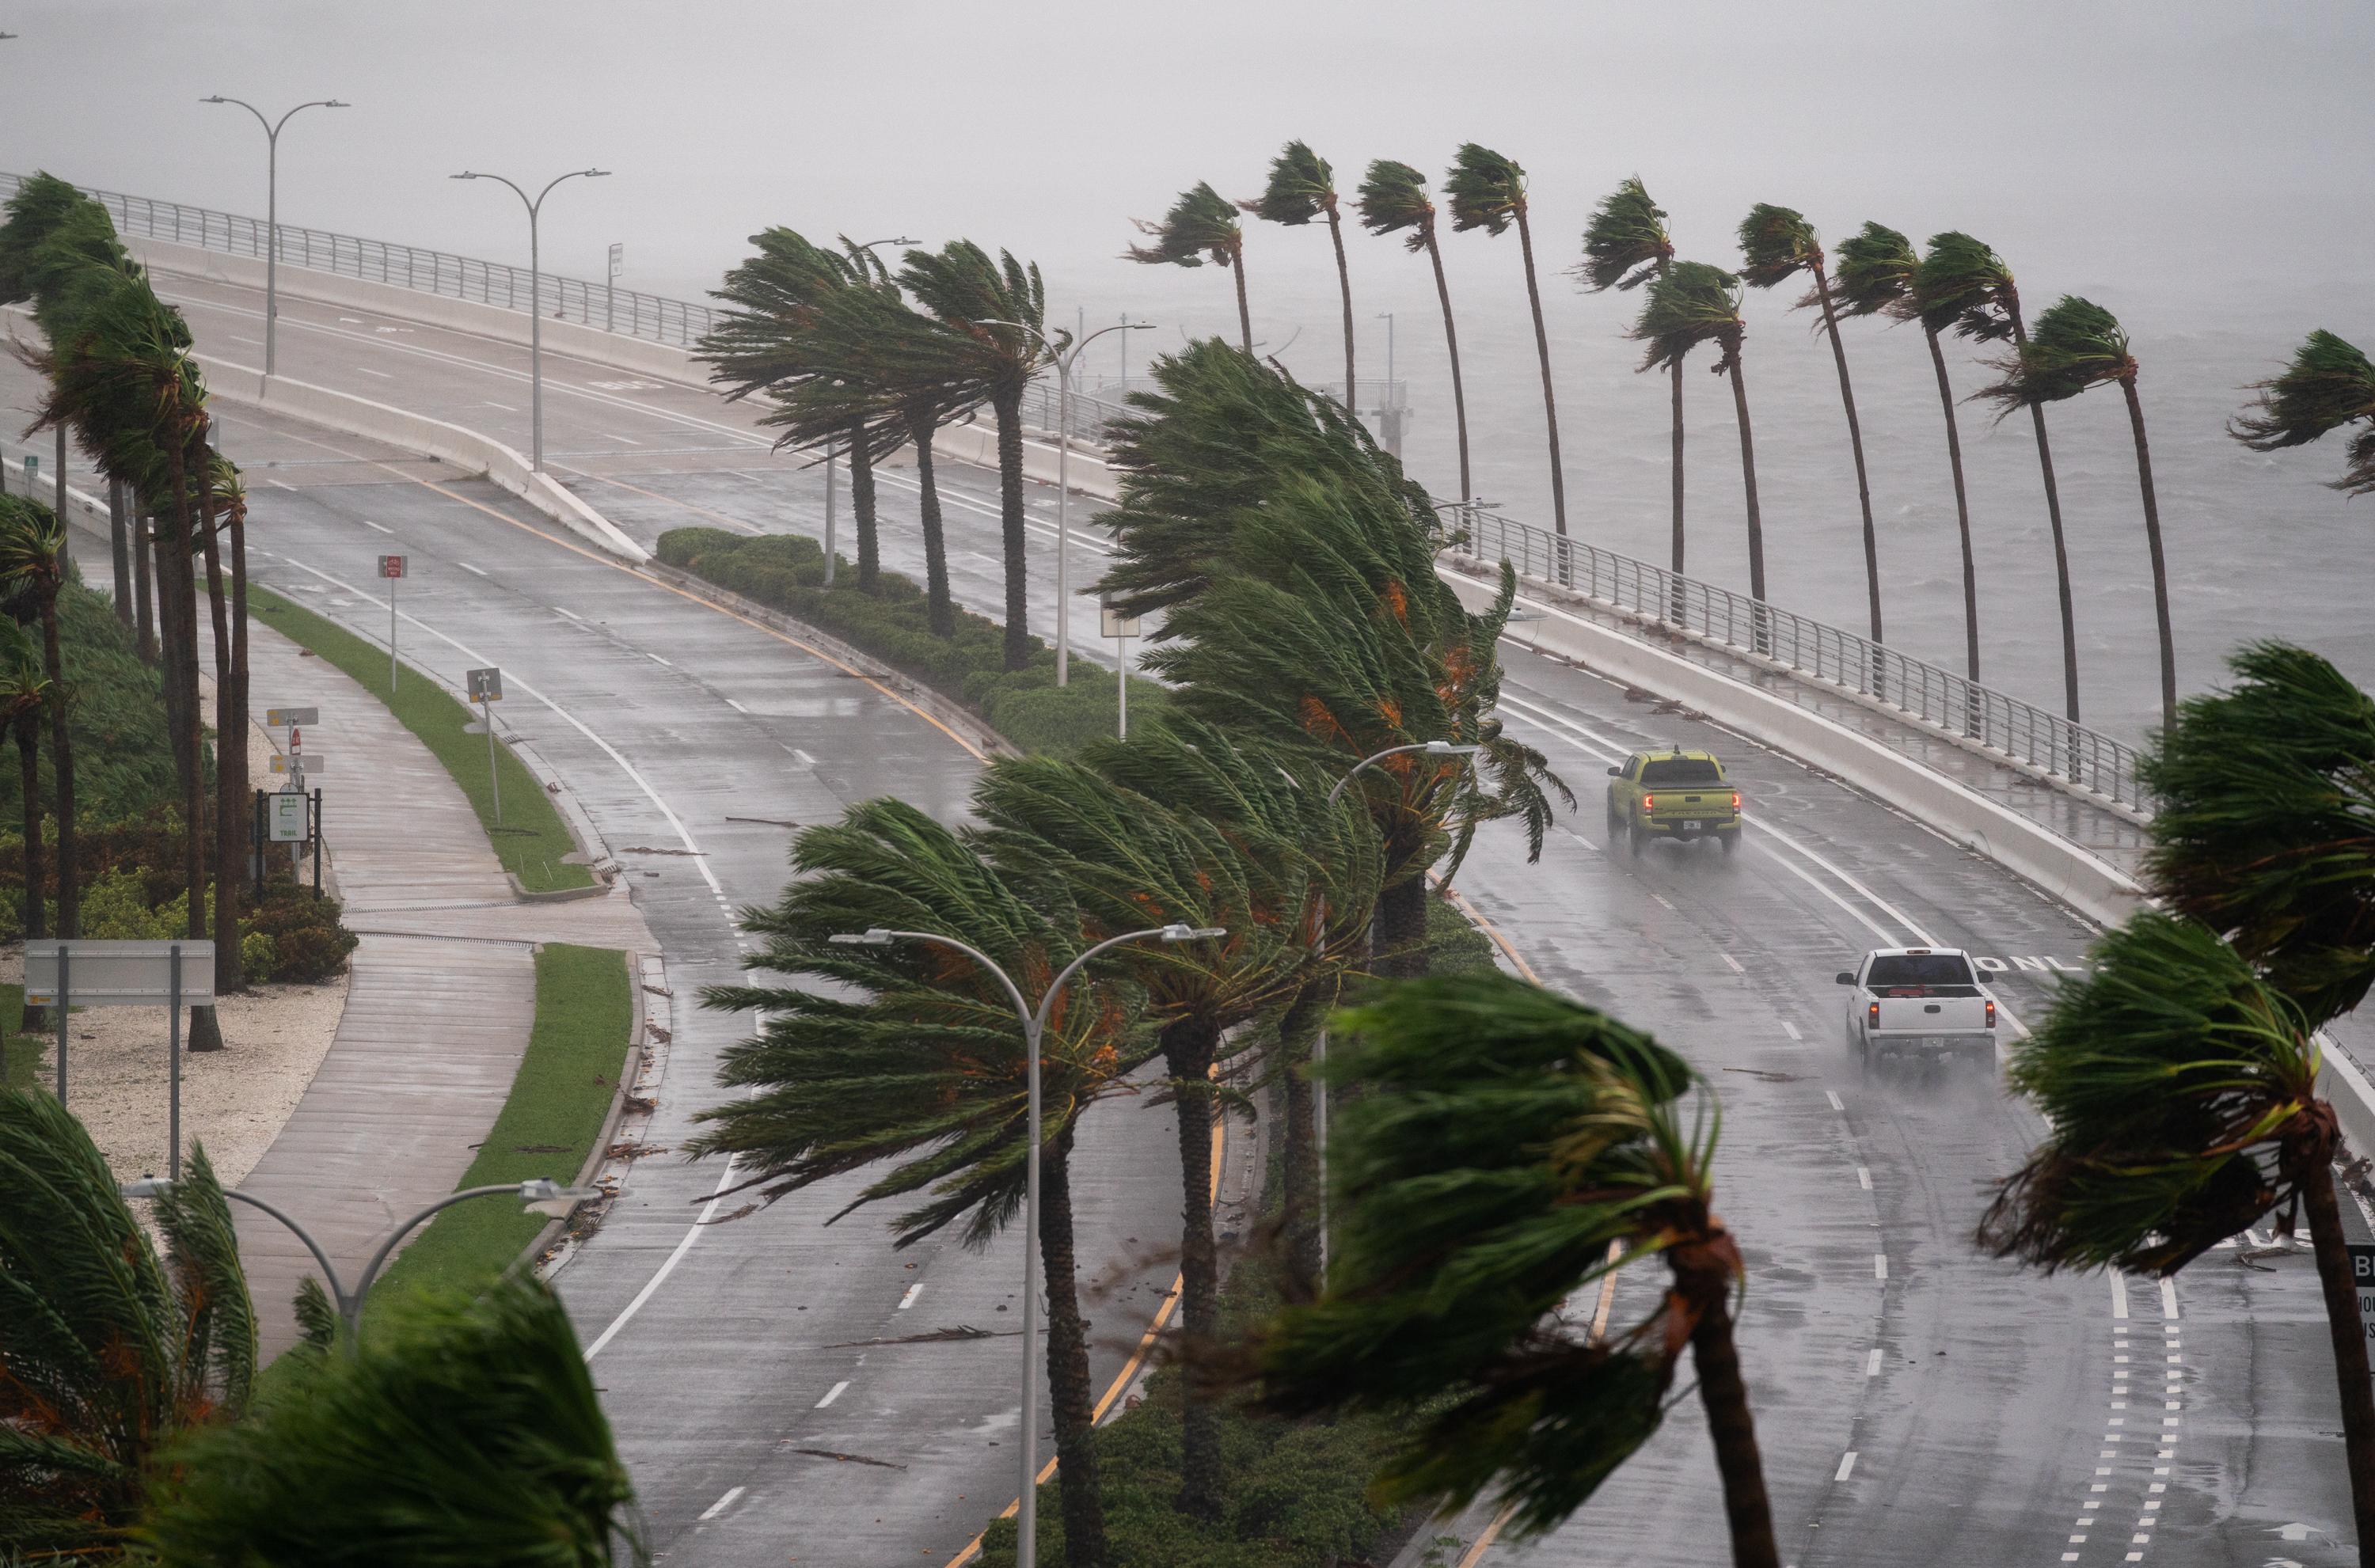 Motorists travel across the John Ringling Causeway as Hurricane Ian churns to the south on Sept. 28 in Sarasota, Florida. The palm trees are being blown across the street.